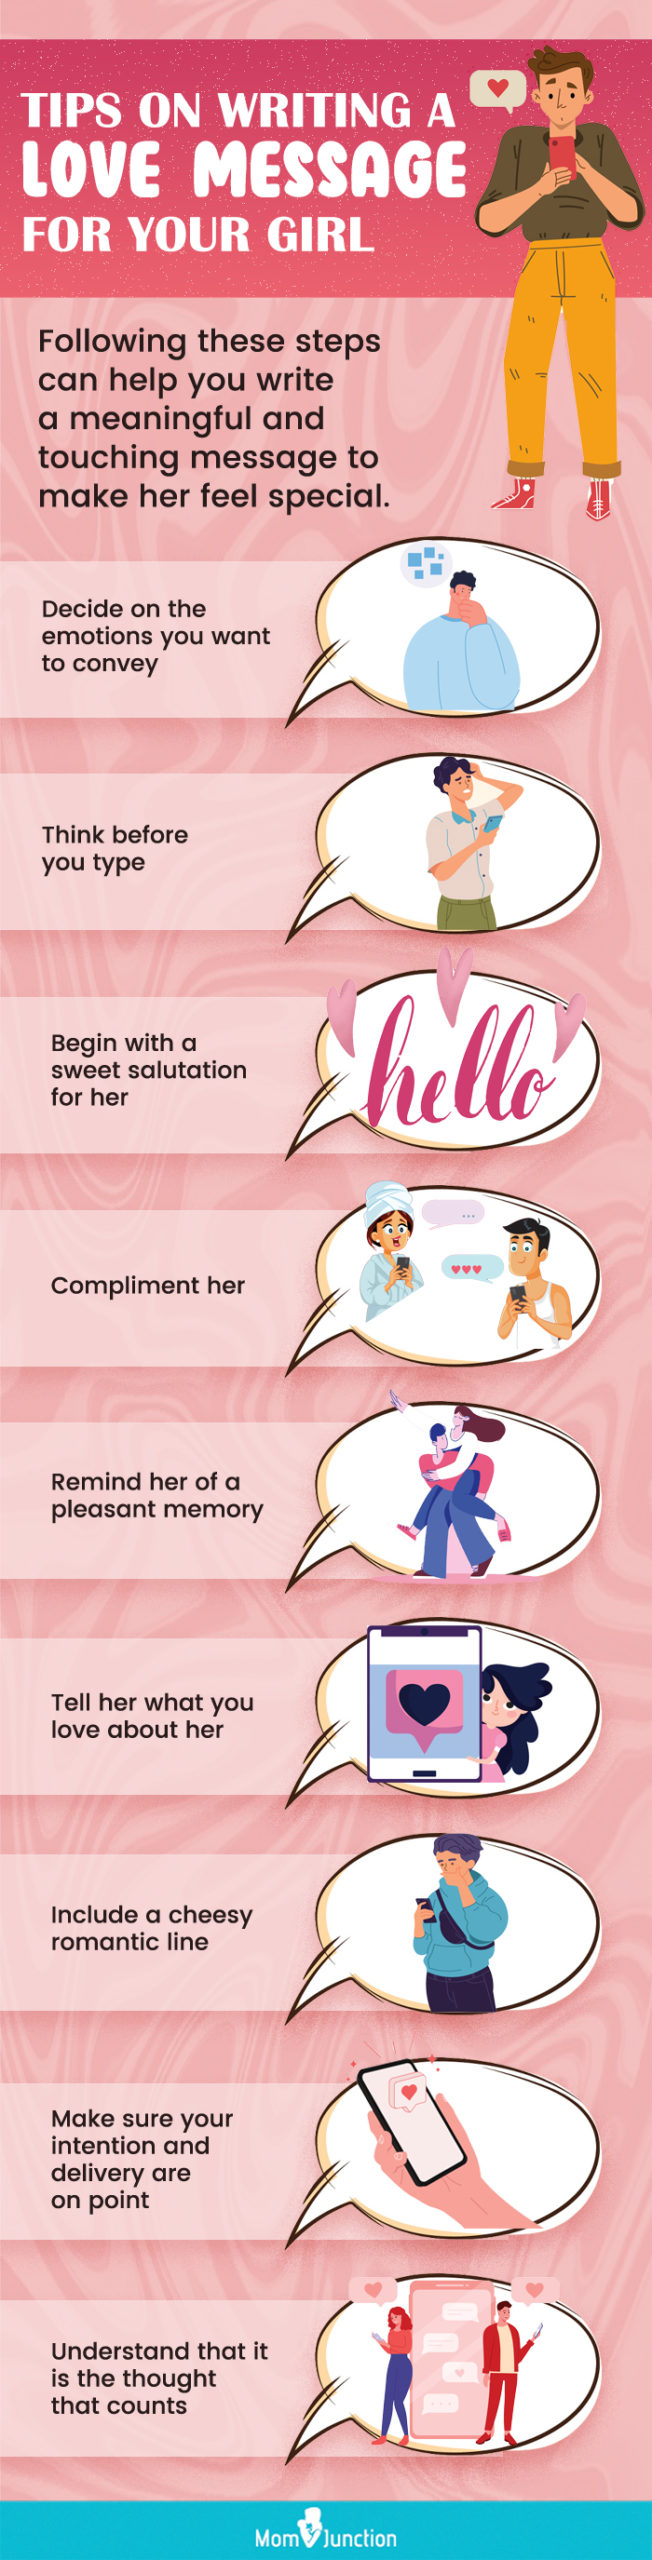 tips on writing a love message for your girl (infographic)